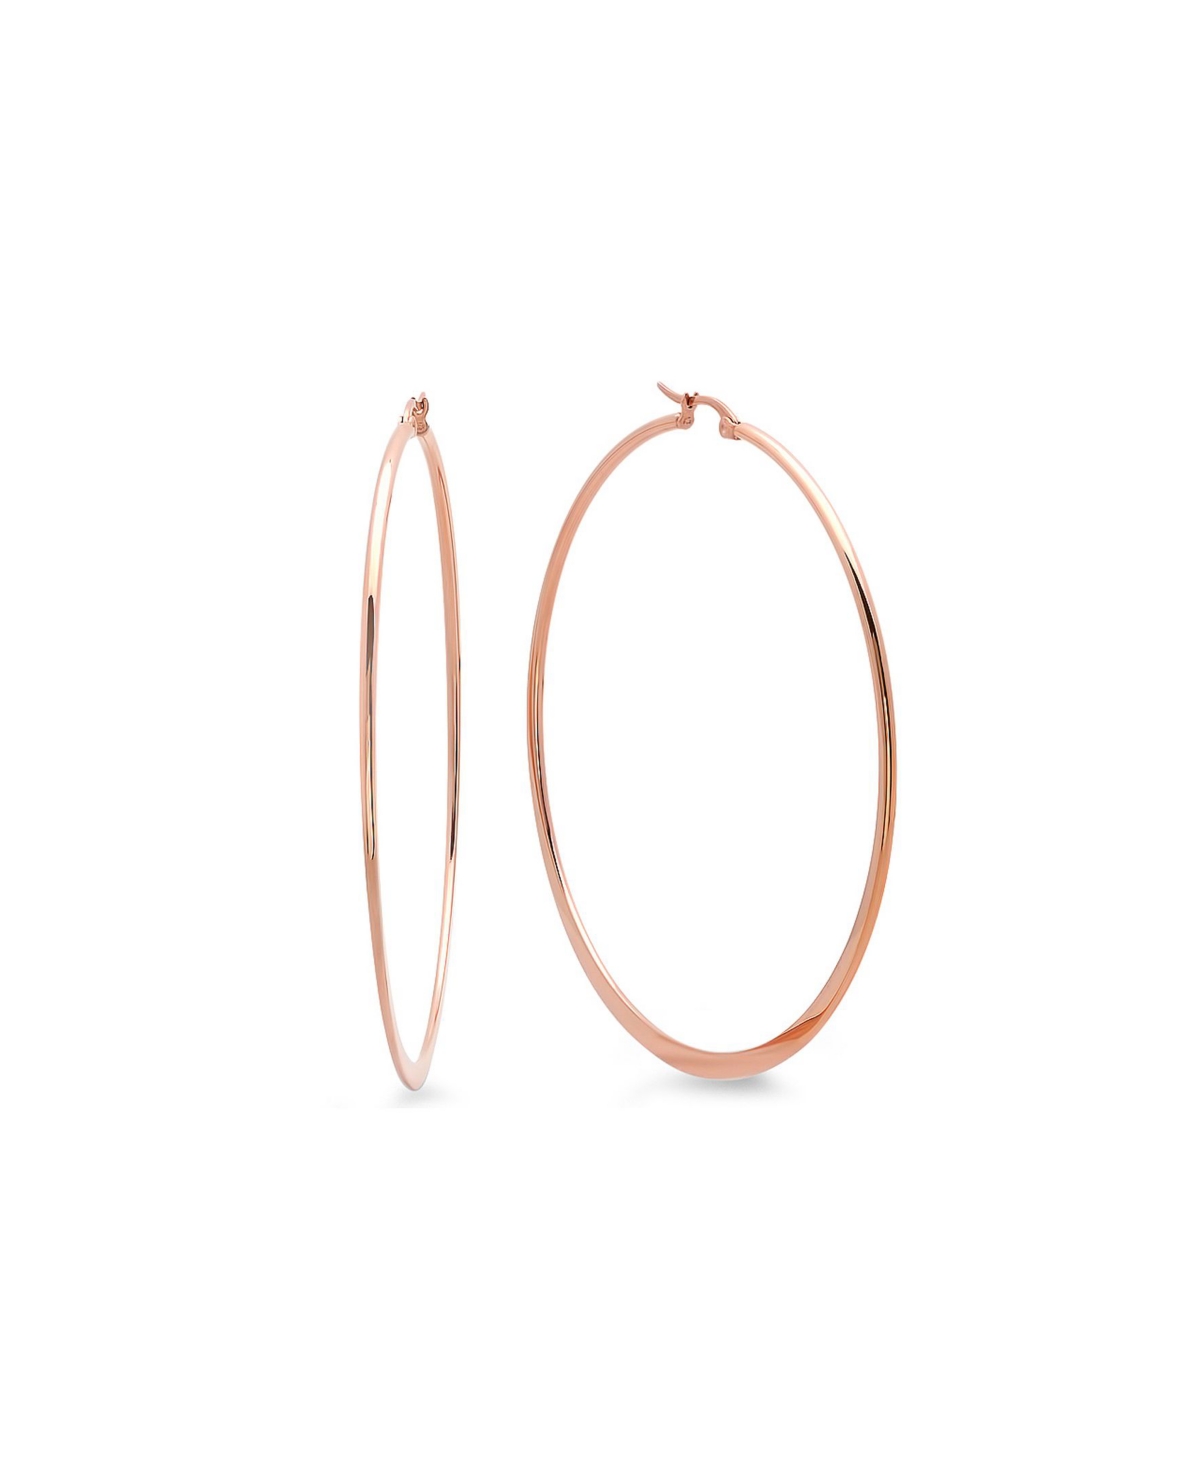 18K Rose Gold Plated Stainless Steel Hoop Earrings - Rose Gold-Plated